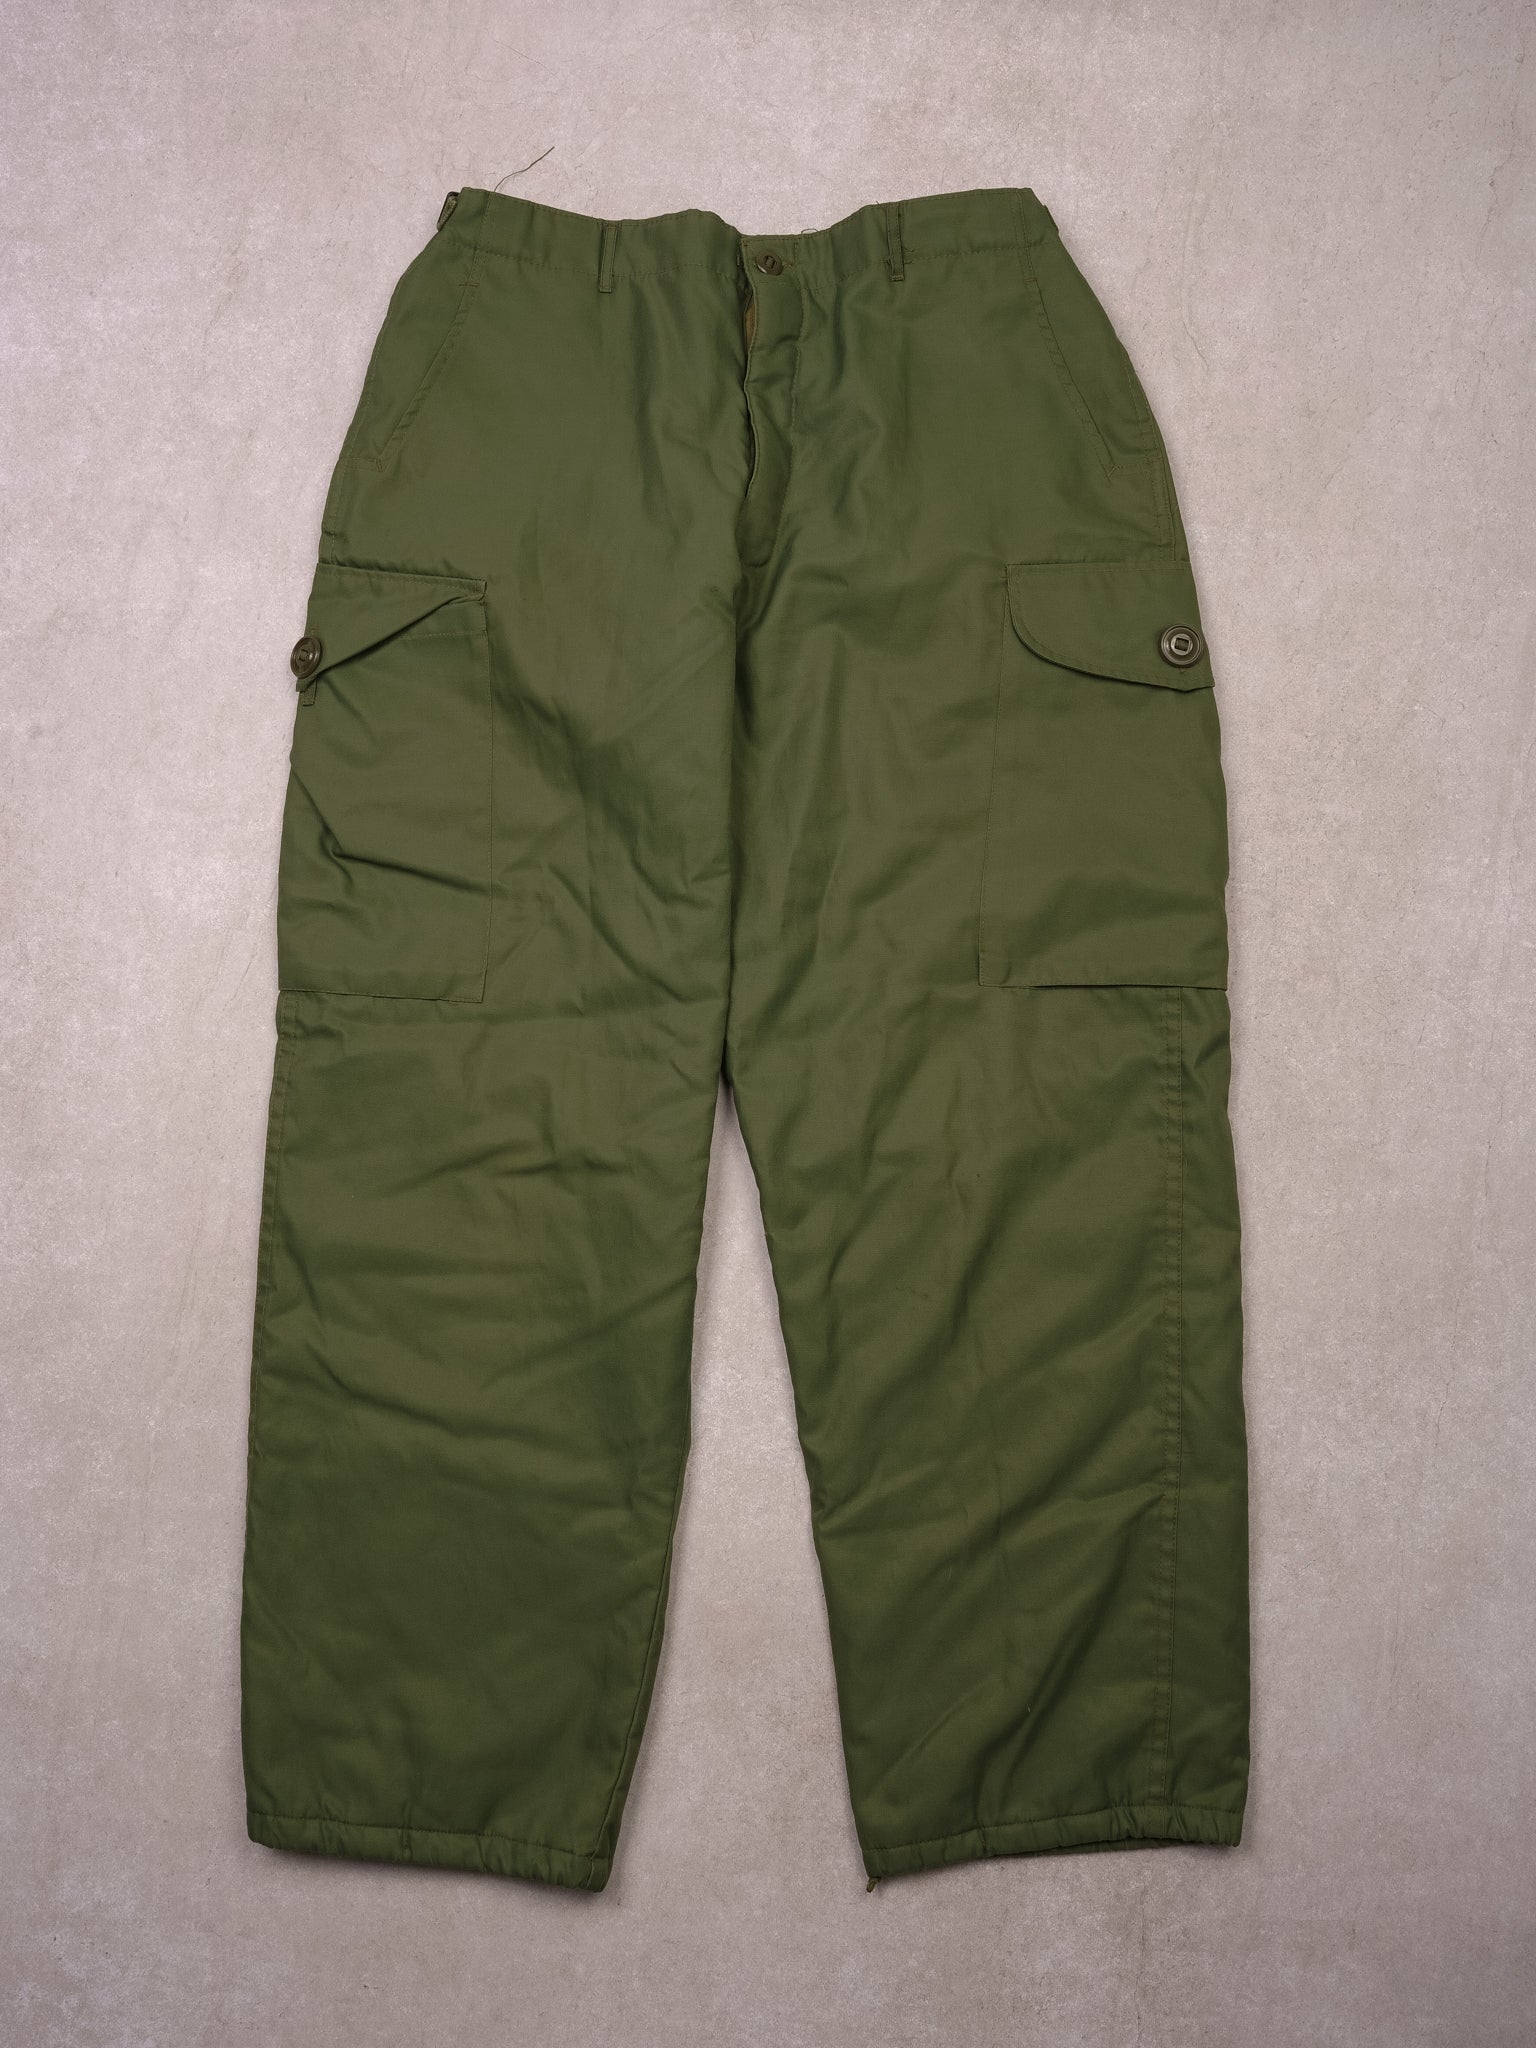 Vintage 80s Green Army Frontenac Insulated Nylon Pants (32x32)